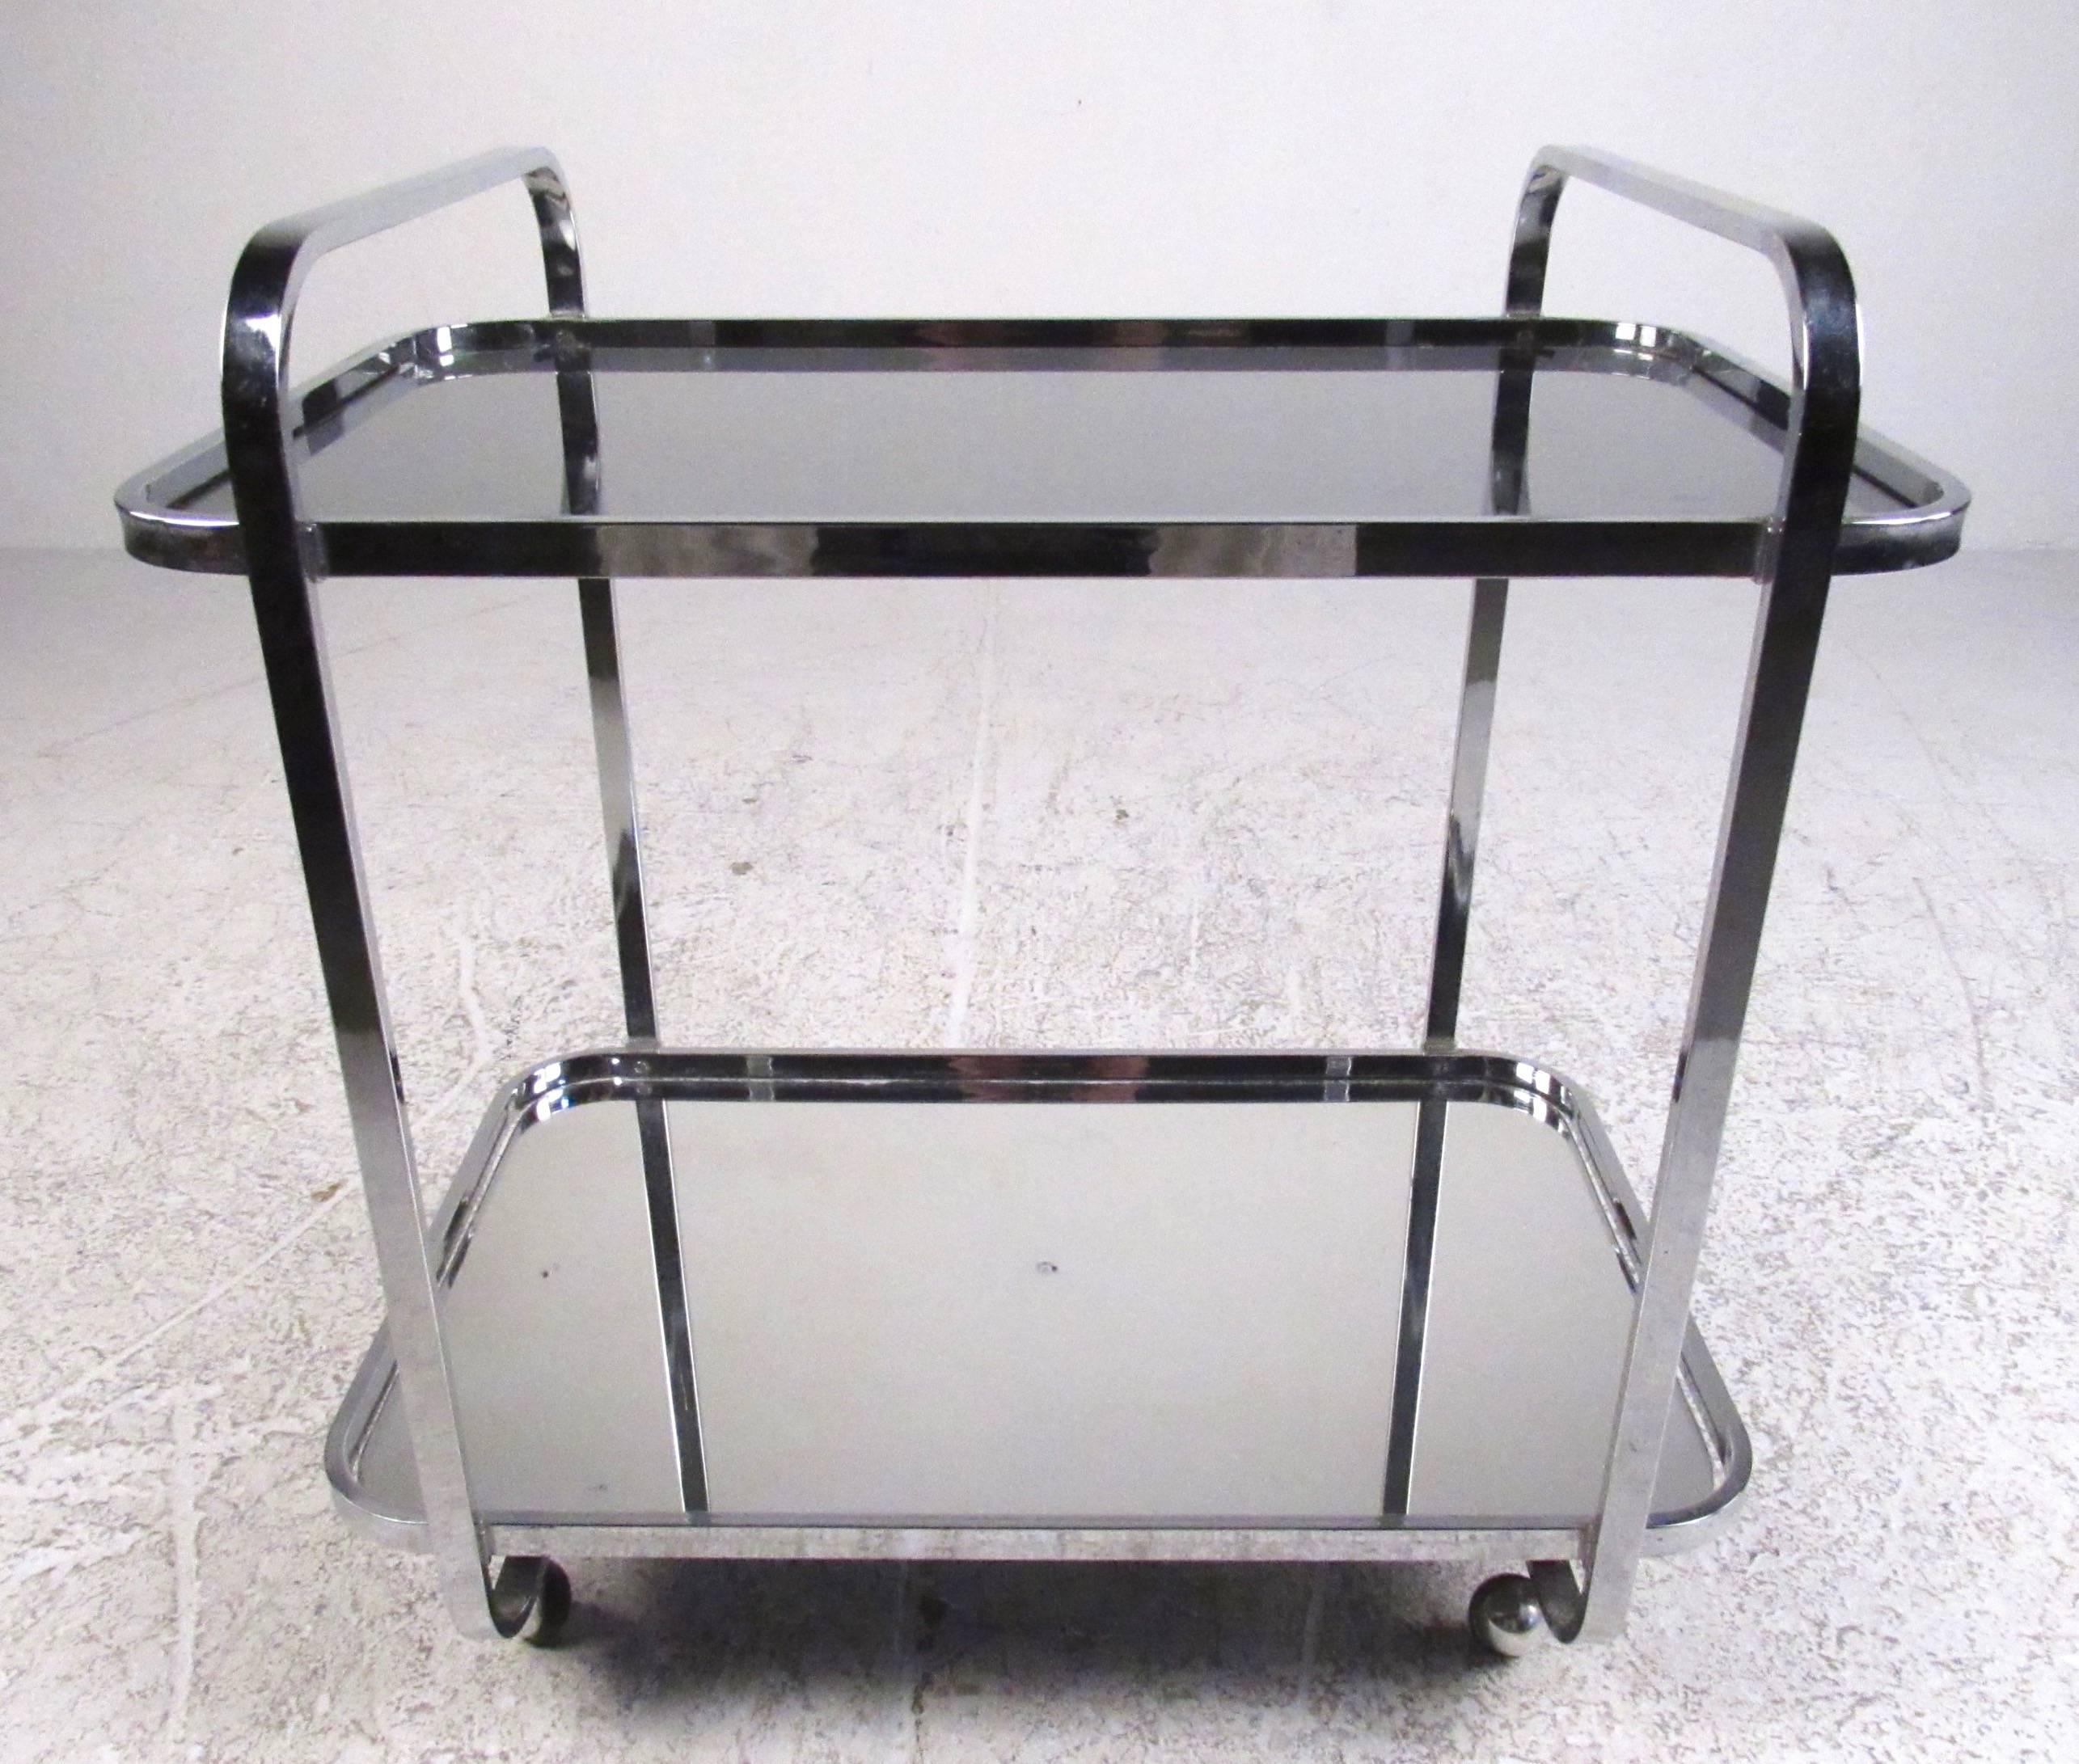 Offering plenty of room for storing glassware and bottle, this Mid-Century chrome and glass service cart makes a stylish and versatile addition to home or business. Top shelf is made of smoked glass, bottom has a mirrored finish. An impressive